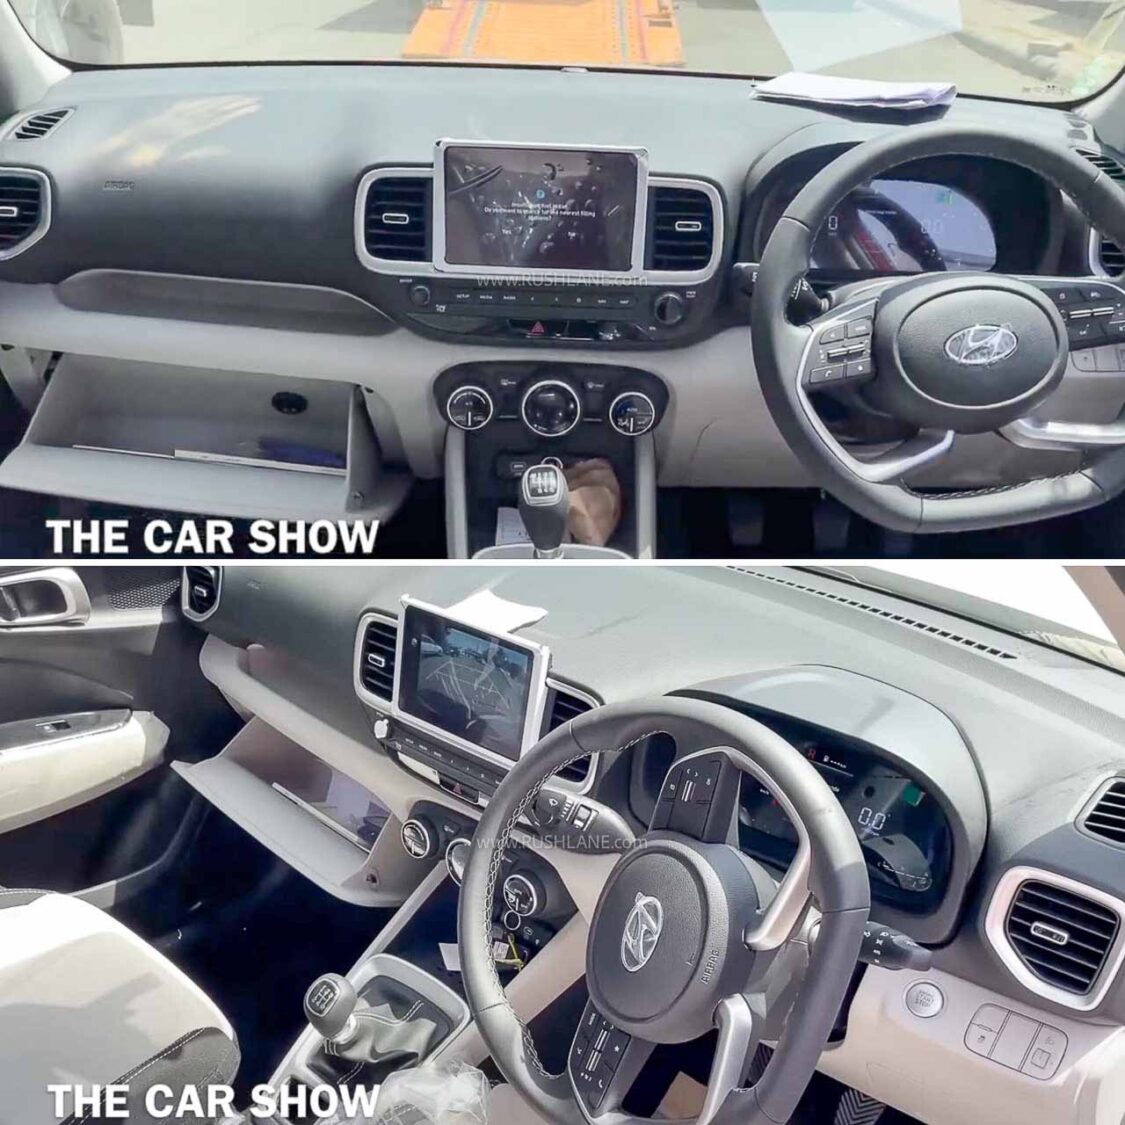 Hyundai Venue Facelift - Dashboard layout is same. Both variants get same touchscreen, digital instrument cluster, sunroof, wireless charger, wireless Android Auto / Apple Carplay